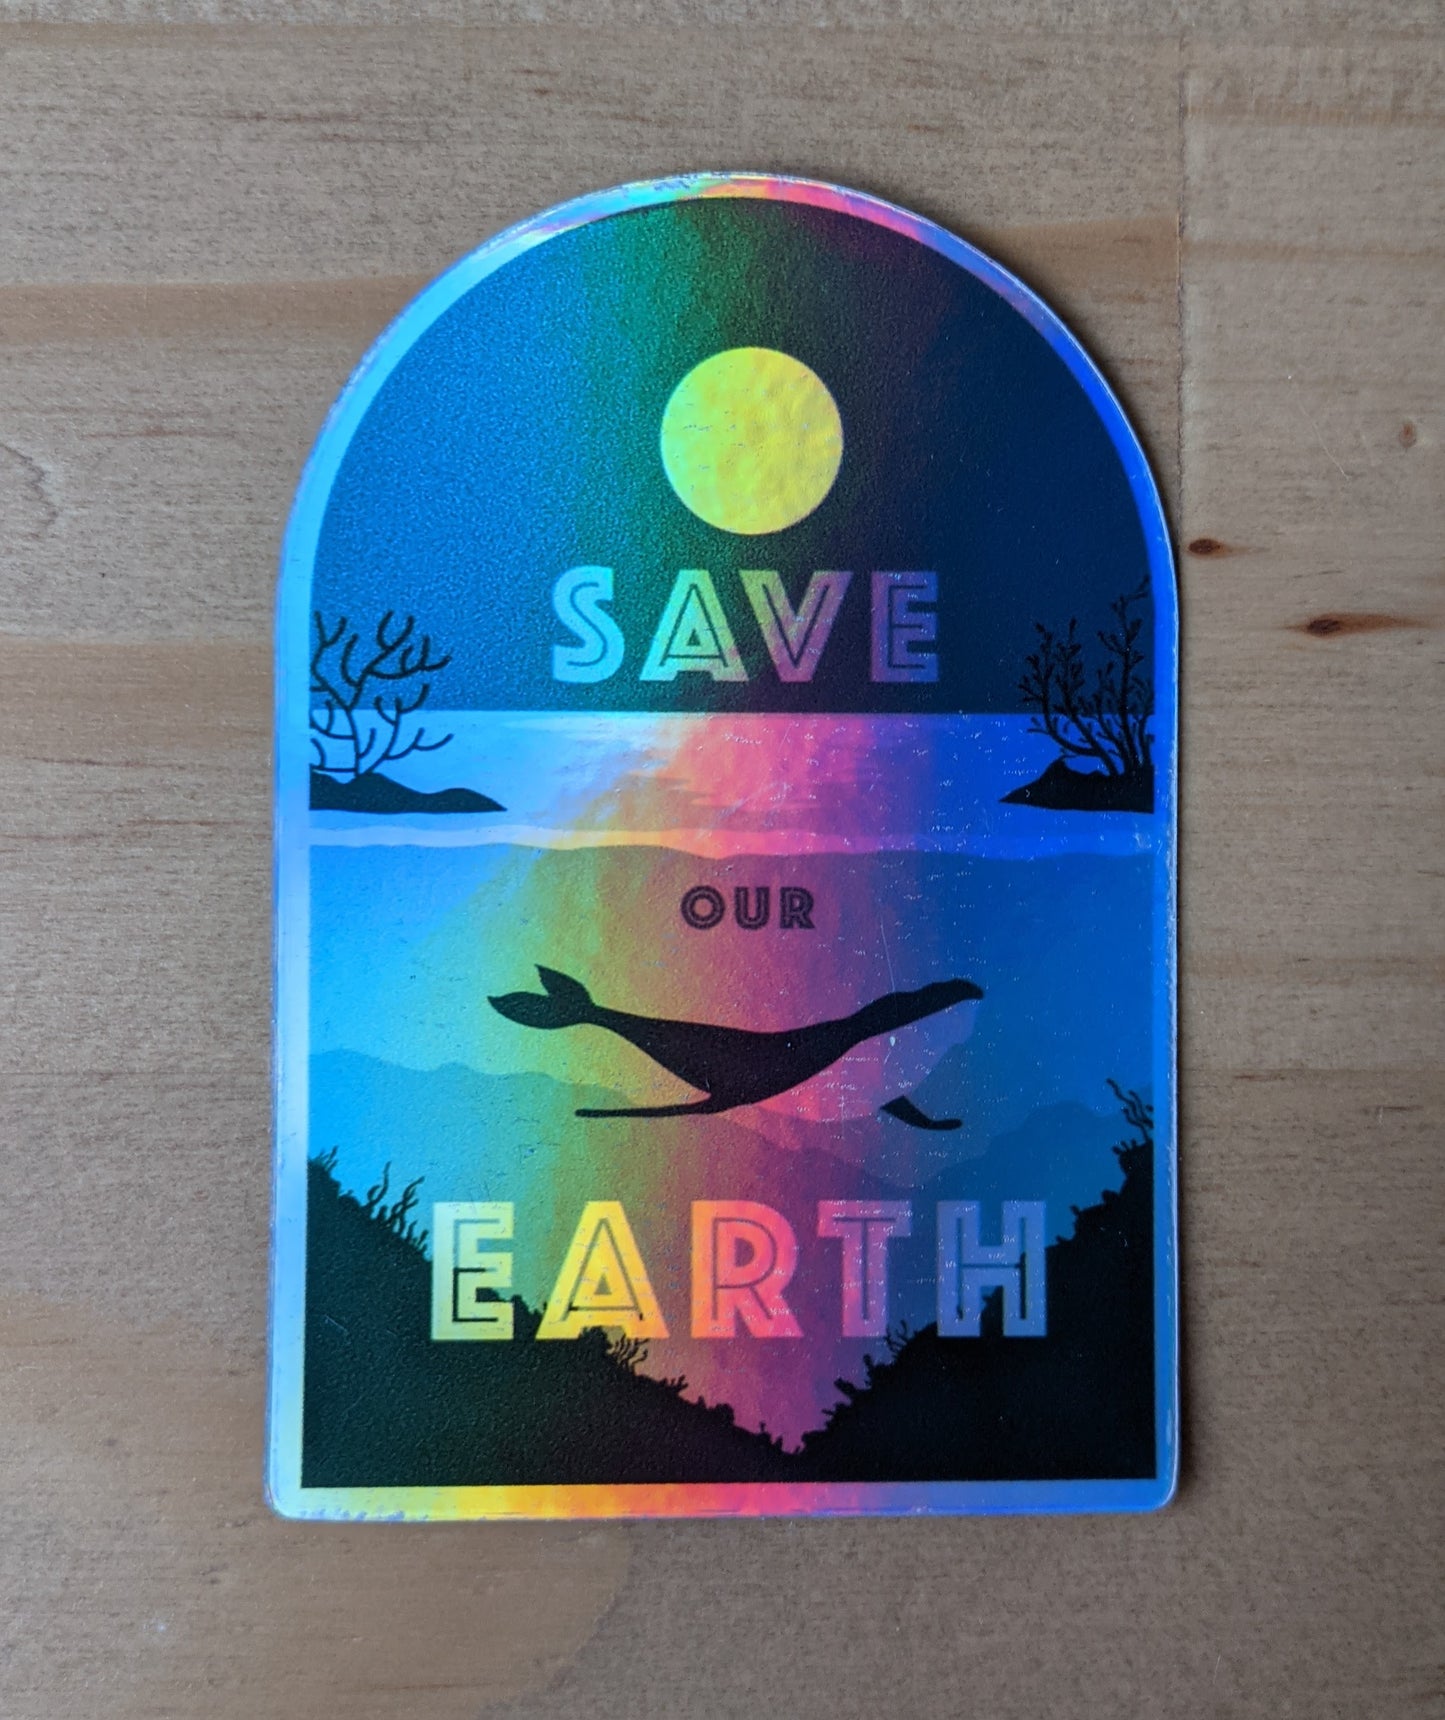 Arched sticker with ocean whale scene reading "Save our earth"  created by Jackie from Present